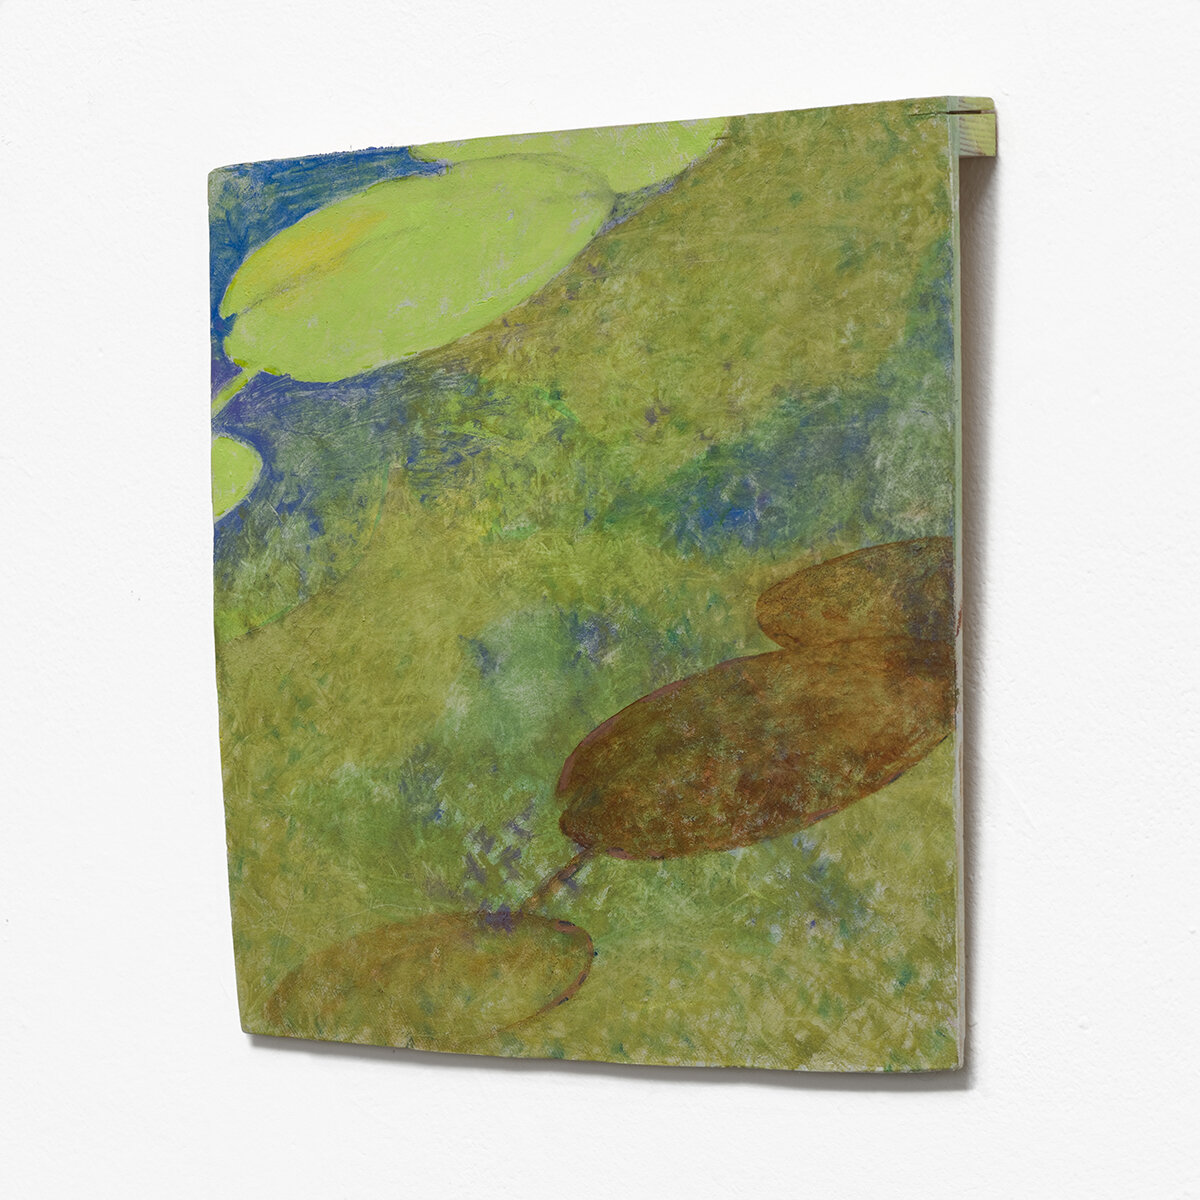   Study for Pond on Wheels XII  , 2019  3/4 view Oil on canvas on wood   12 ½  x 13 ½ x 1 inches    32 x 34 x 2 ½ cm   